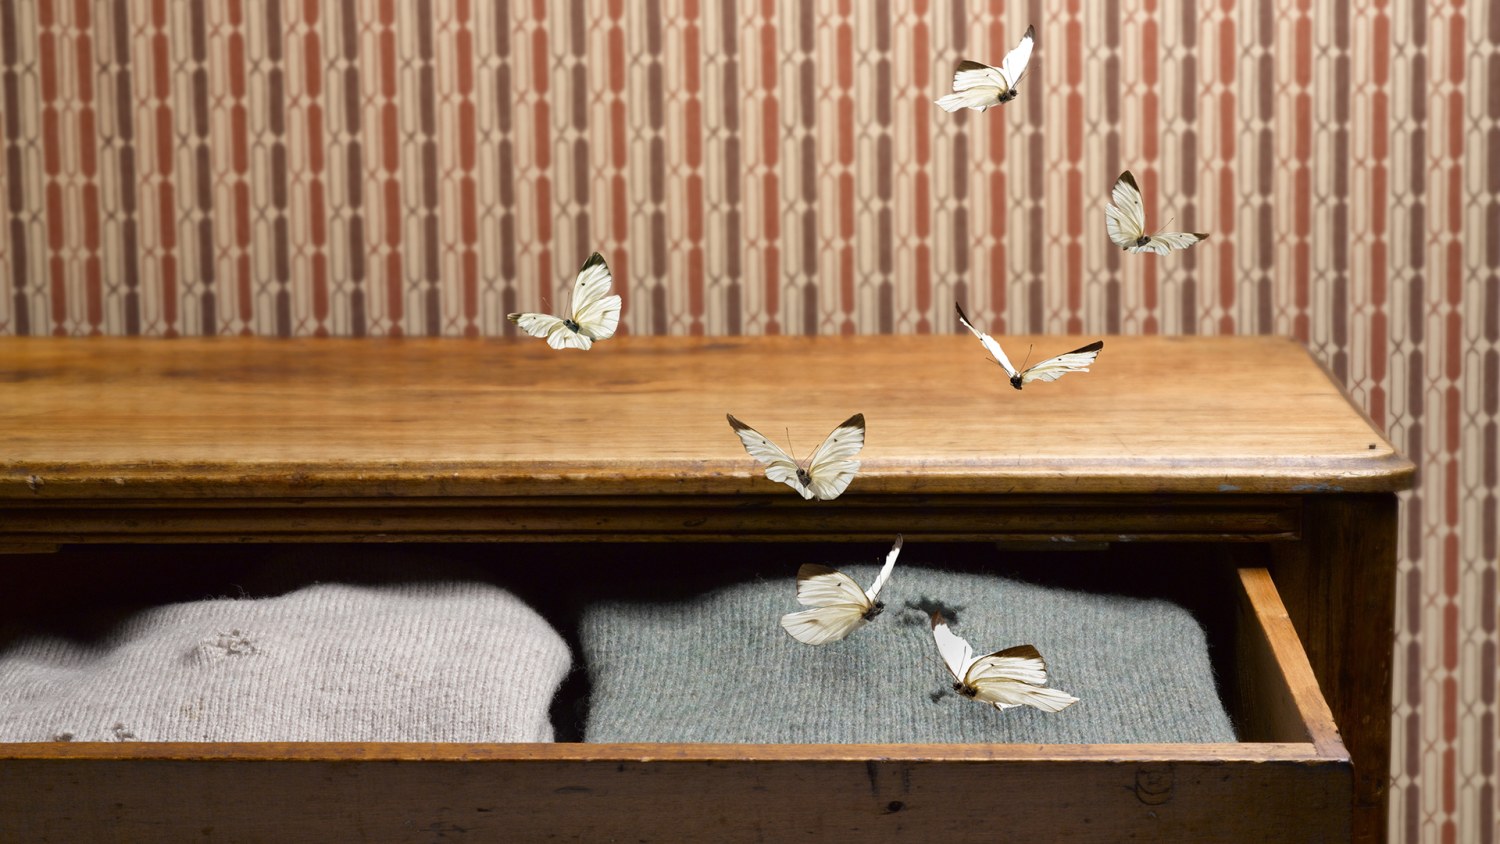 Tips on How To Get Rid Of Moths & Ways to Prevent Them